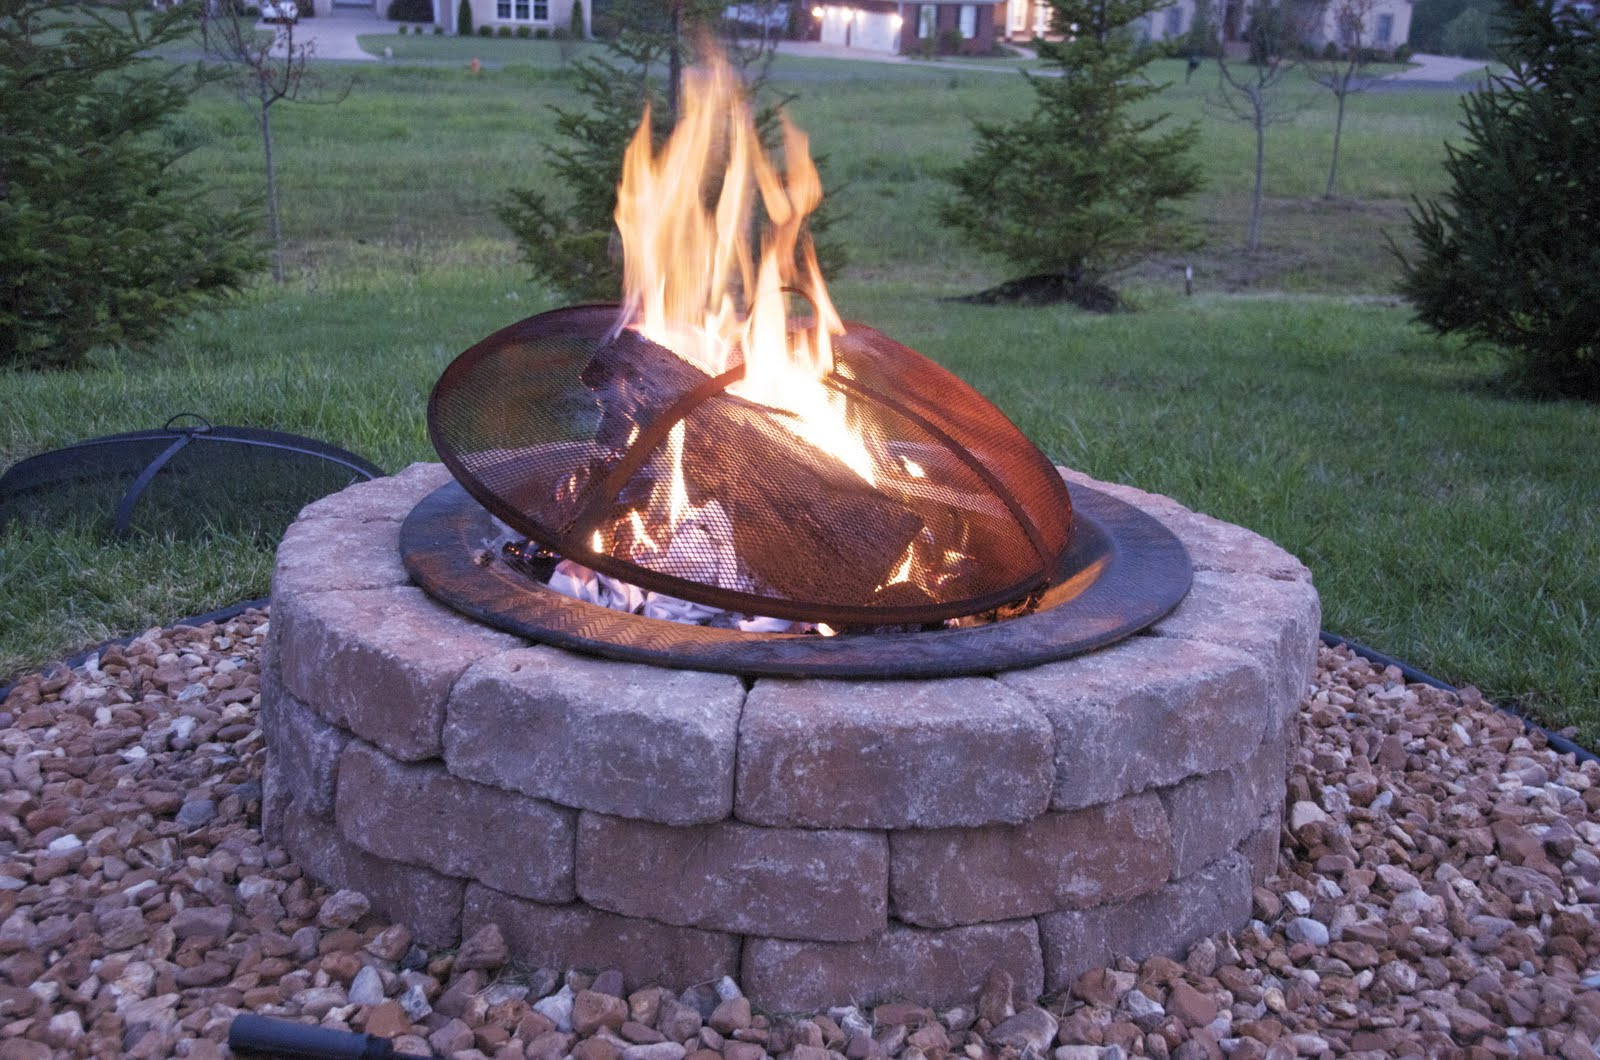 Build Your Own Firepit
 How to build an outdoor firepit The Polkadot Chair